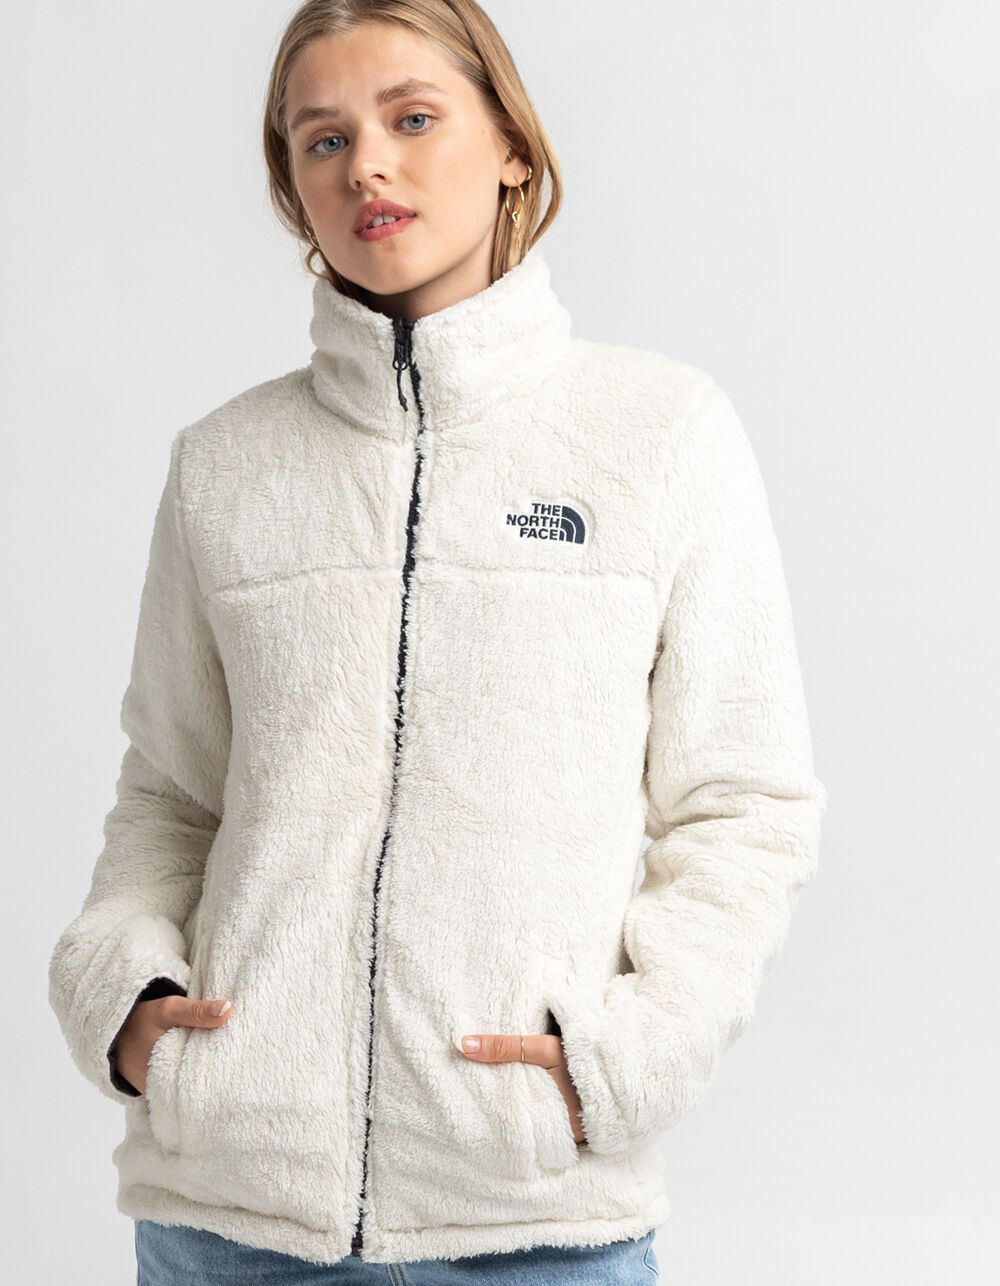 THE NORTH FACE Mossbud Insulated Womens Reversible Jacket - NAVY | Tillys